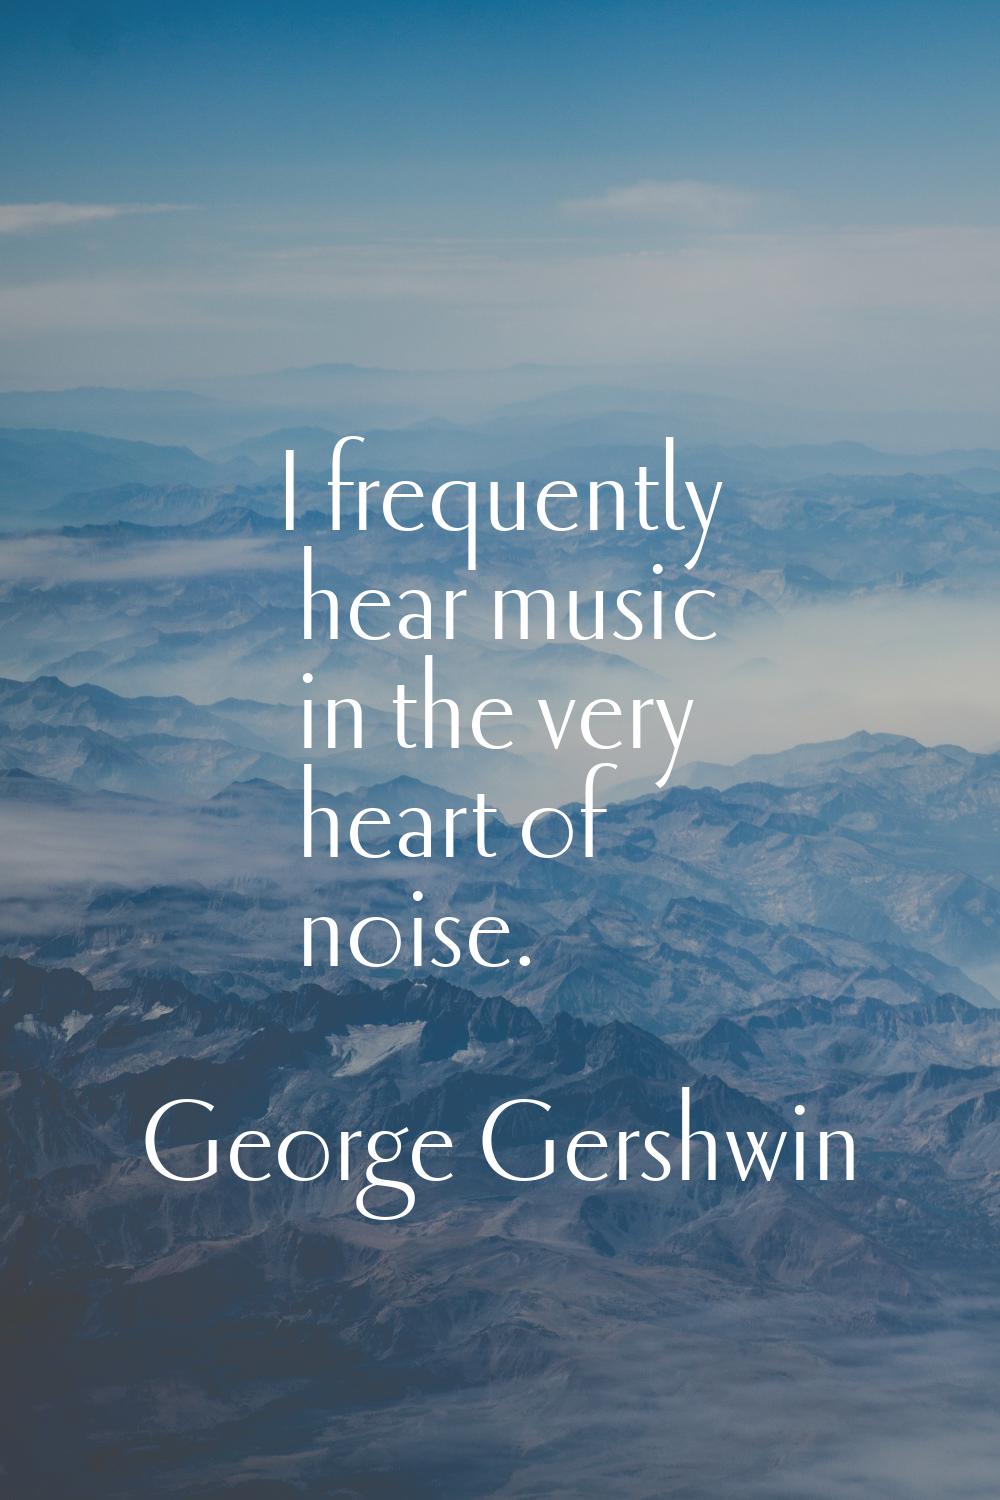 I frequently hear music in the very heart of noise.